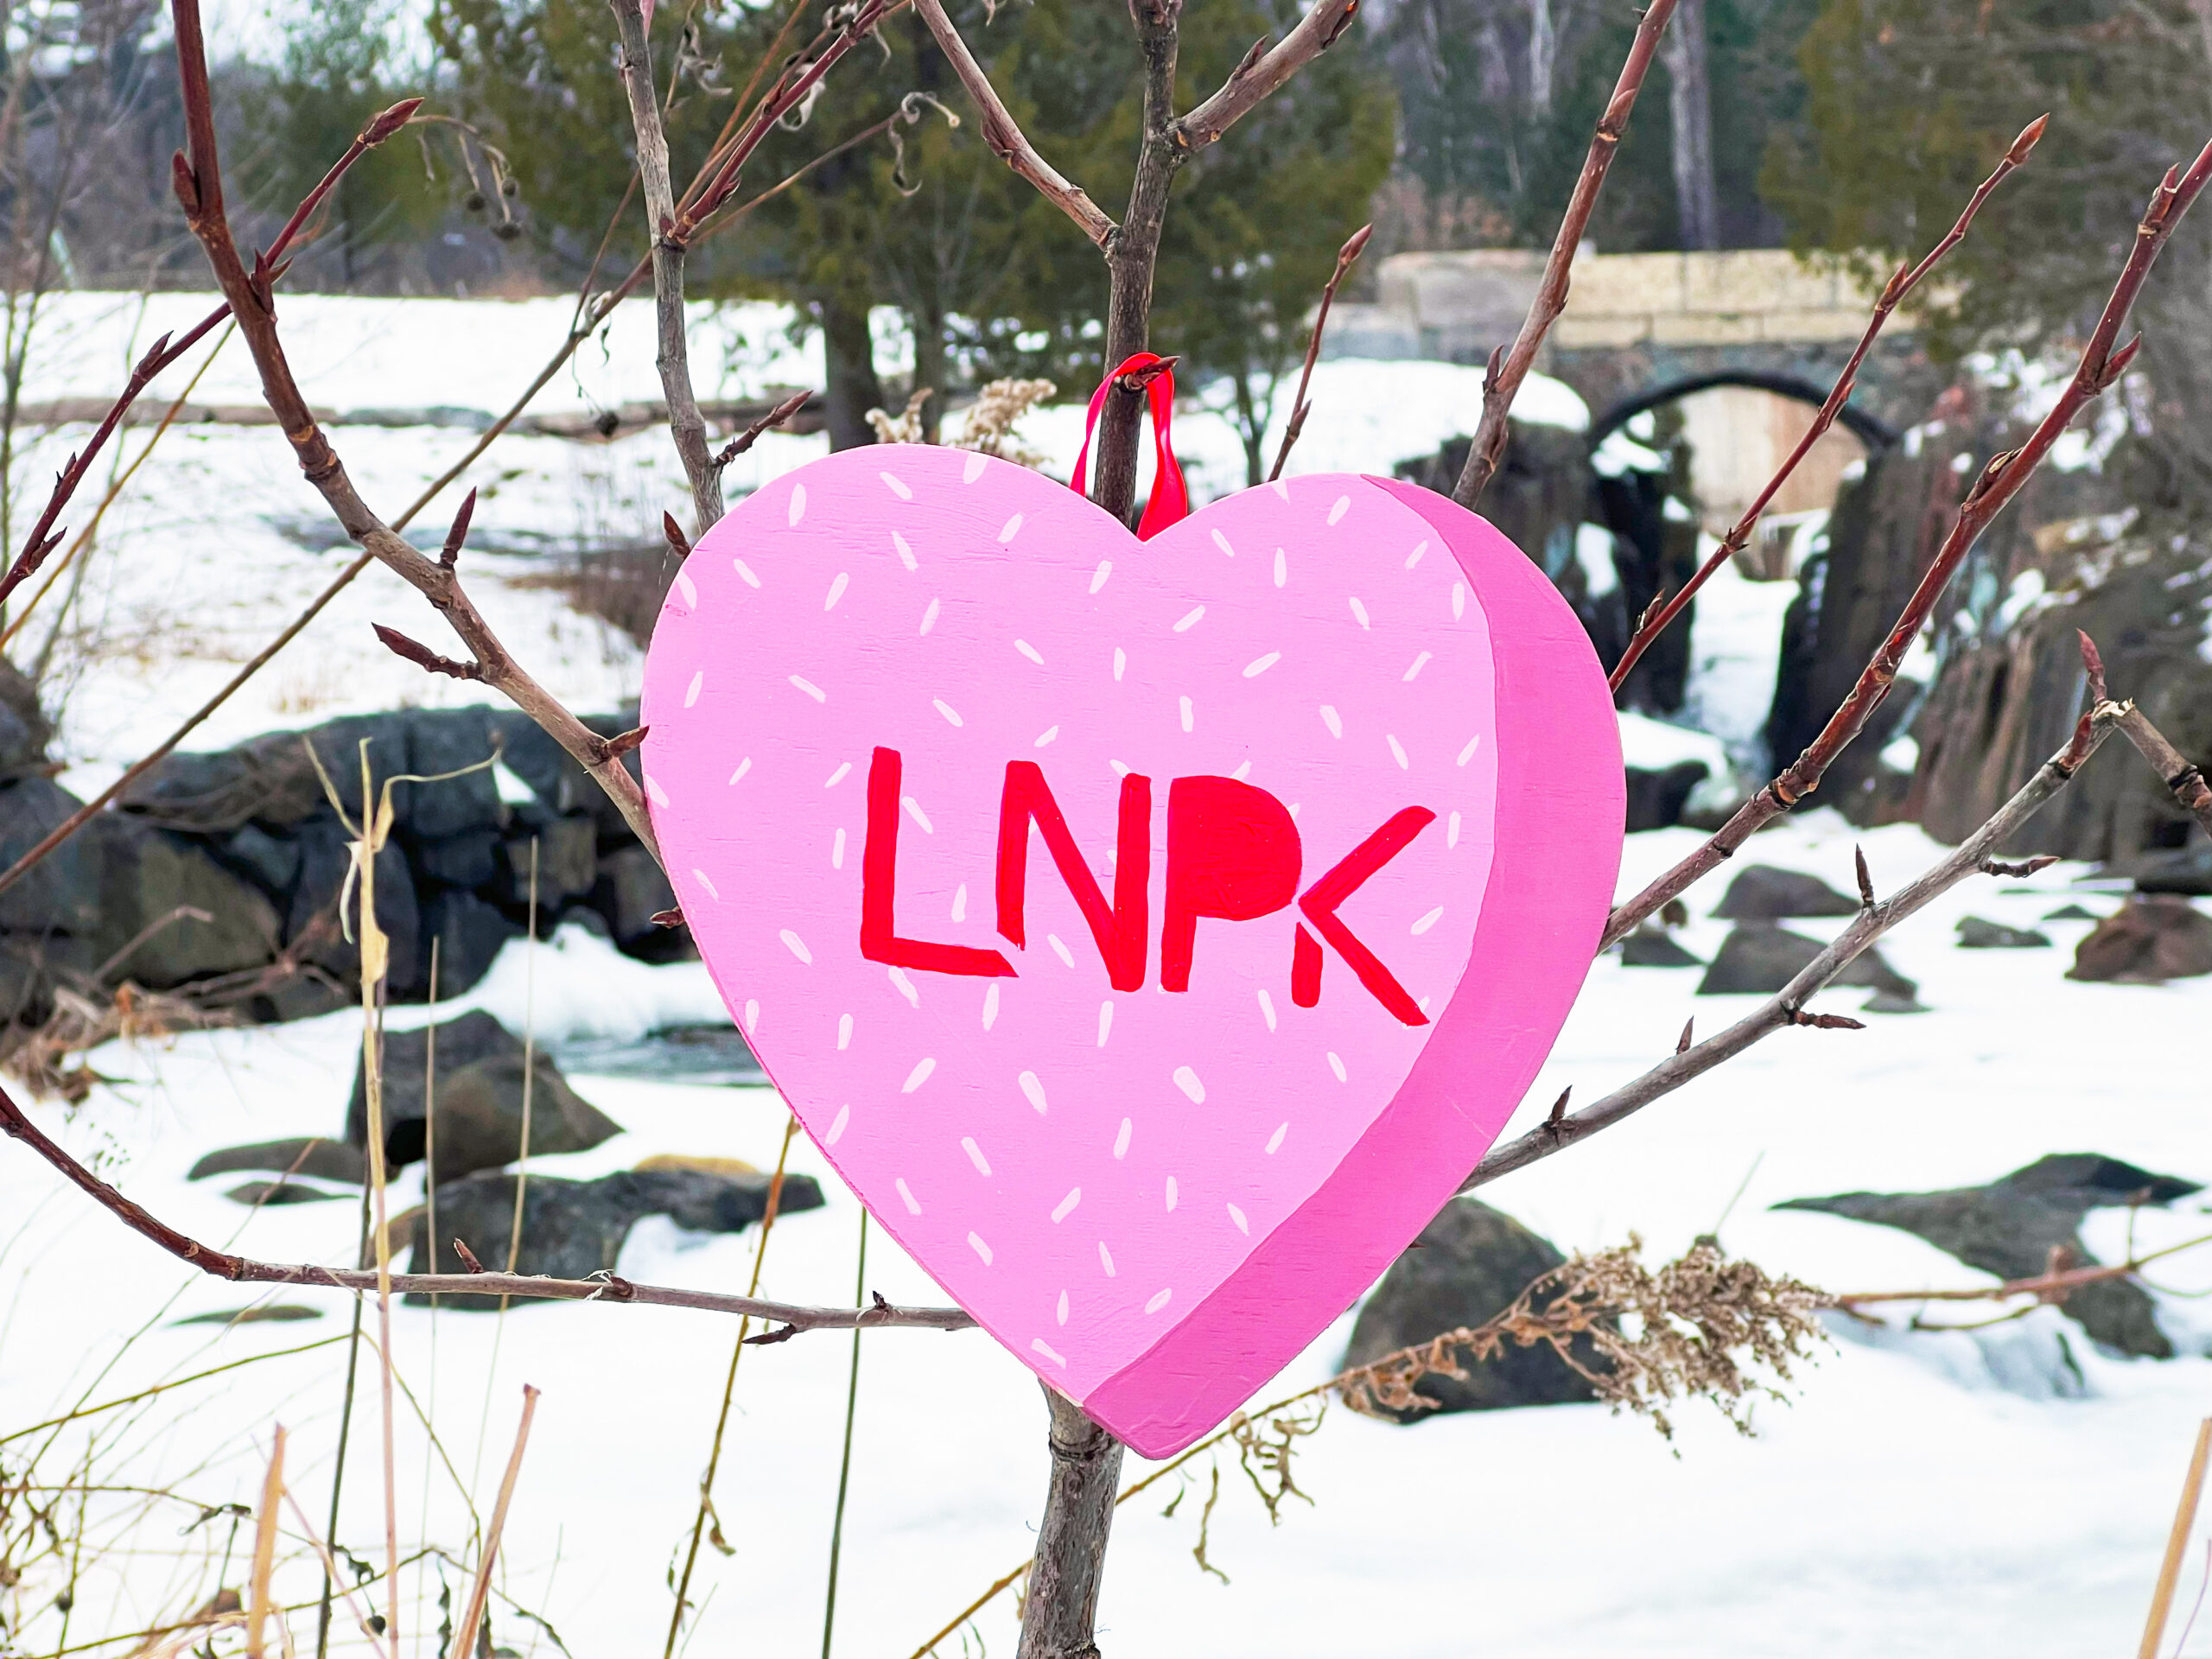 Pink heart with silver polka dots and "LNPK" in red hangs on a tree in front of a frozen creek.